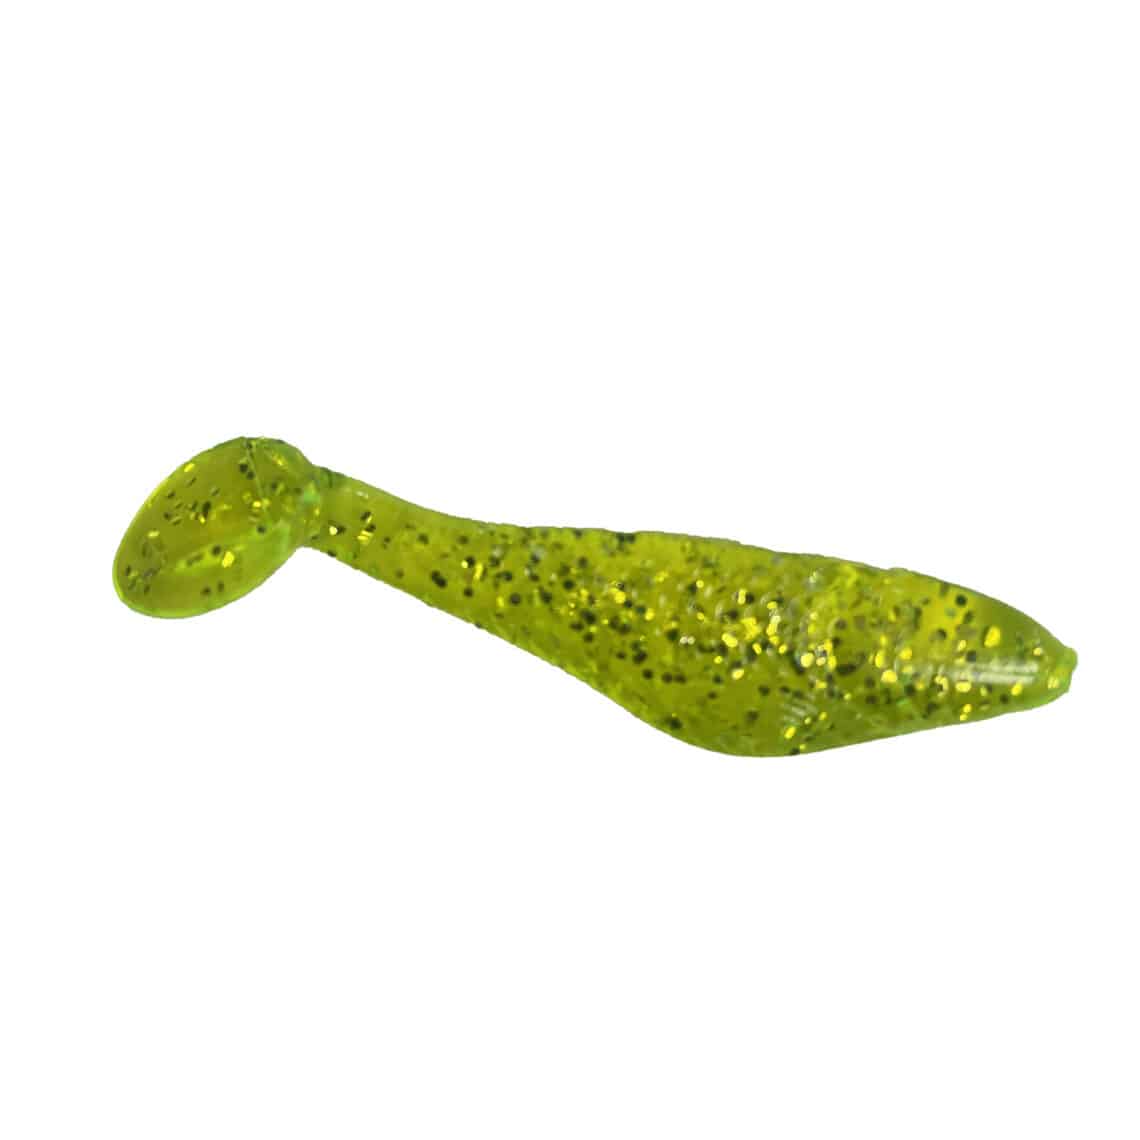 CLOSEOUT * APEX TACKLE 2IN SHAD SOFT BAIT (ONLINE ONLY